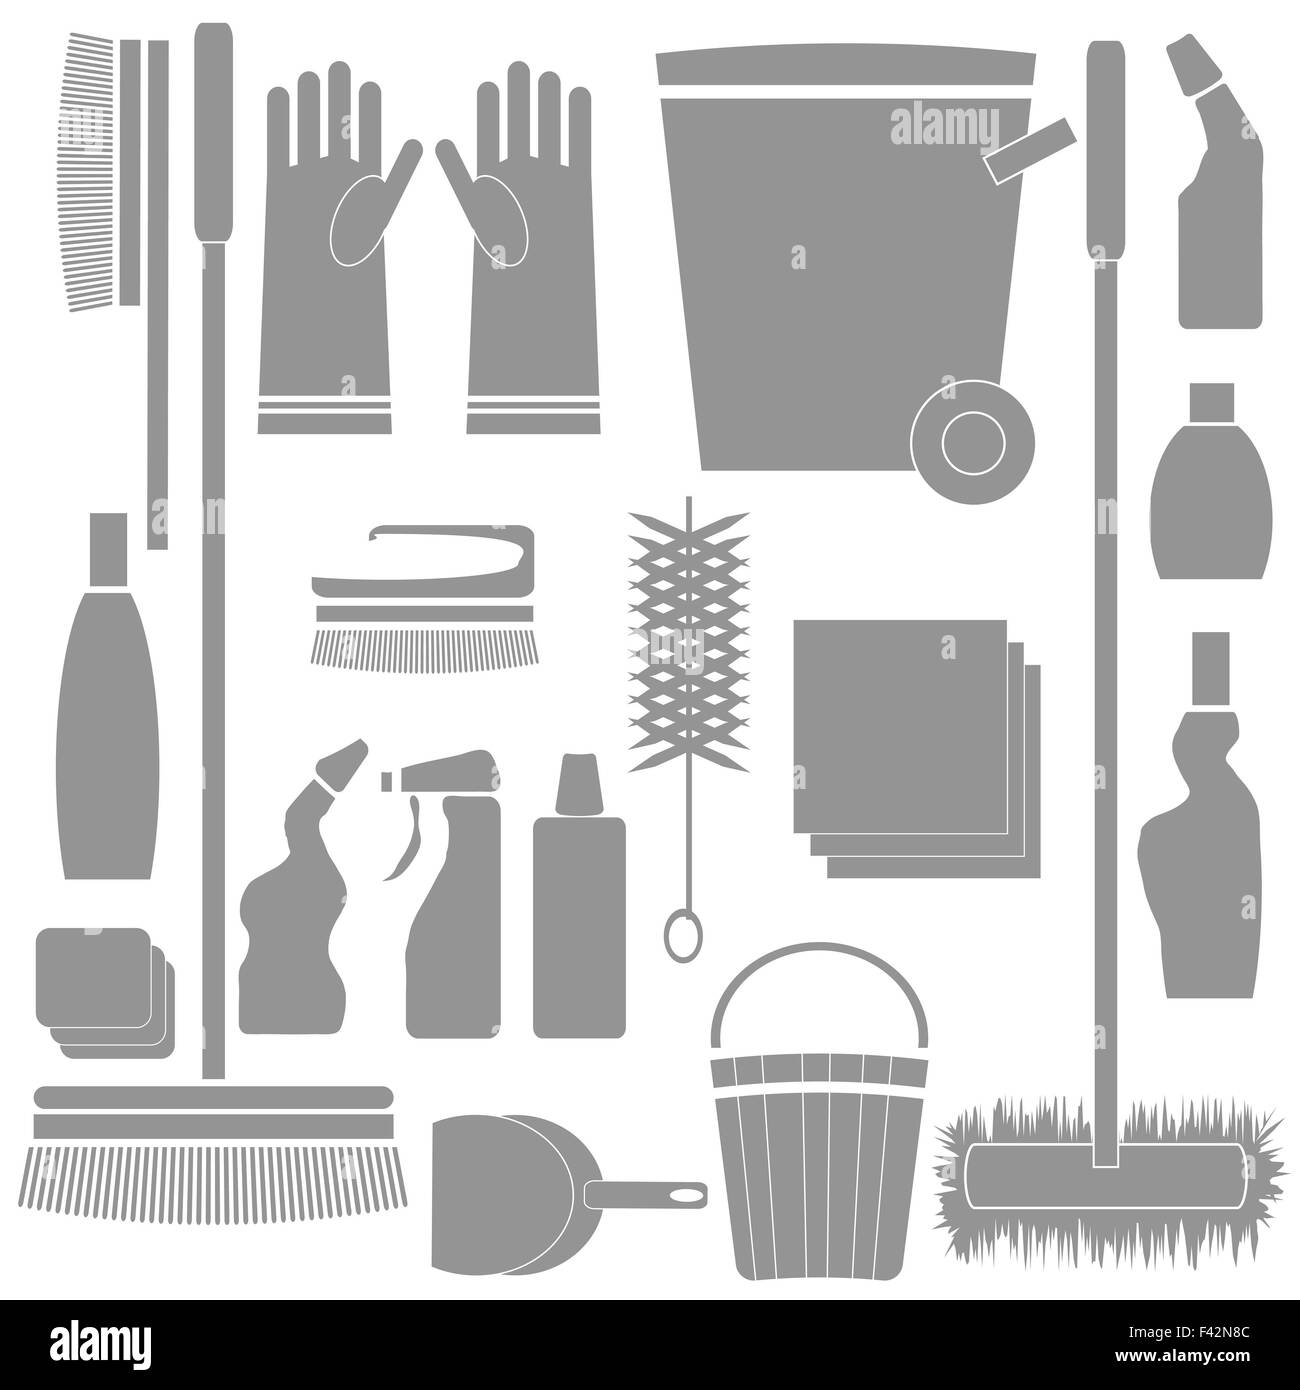 Cleaning Tools silhouettes Stock Photo